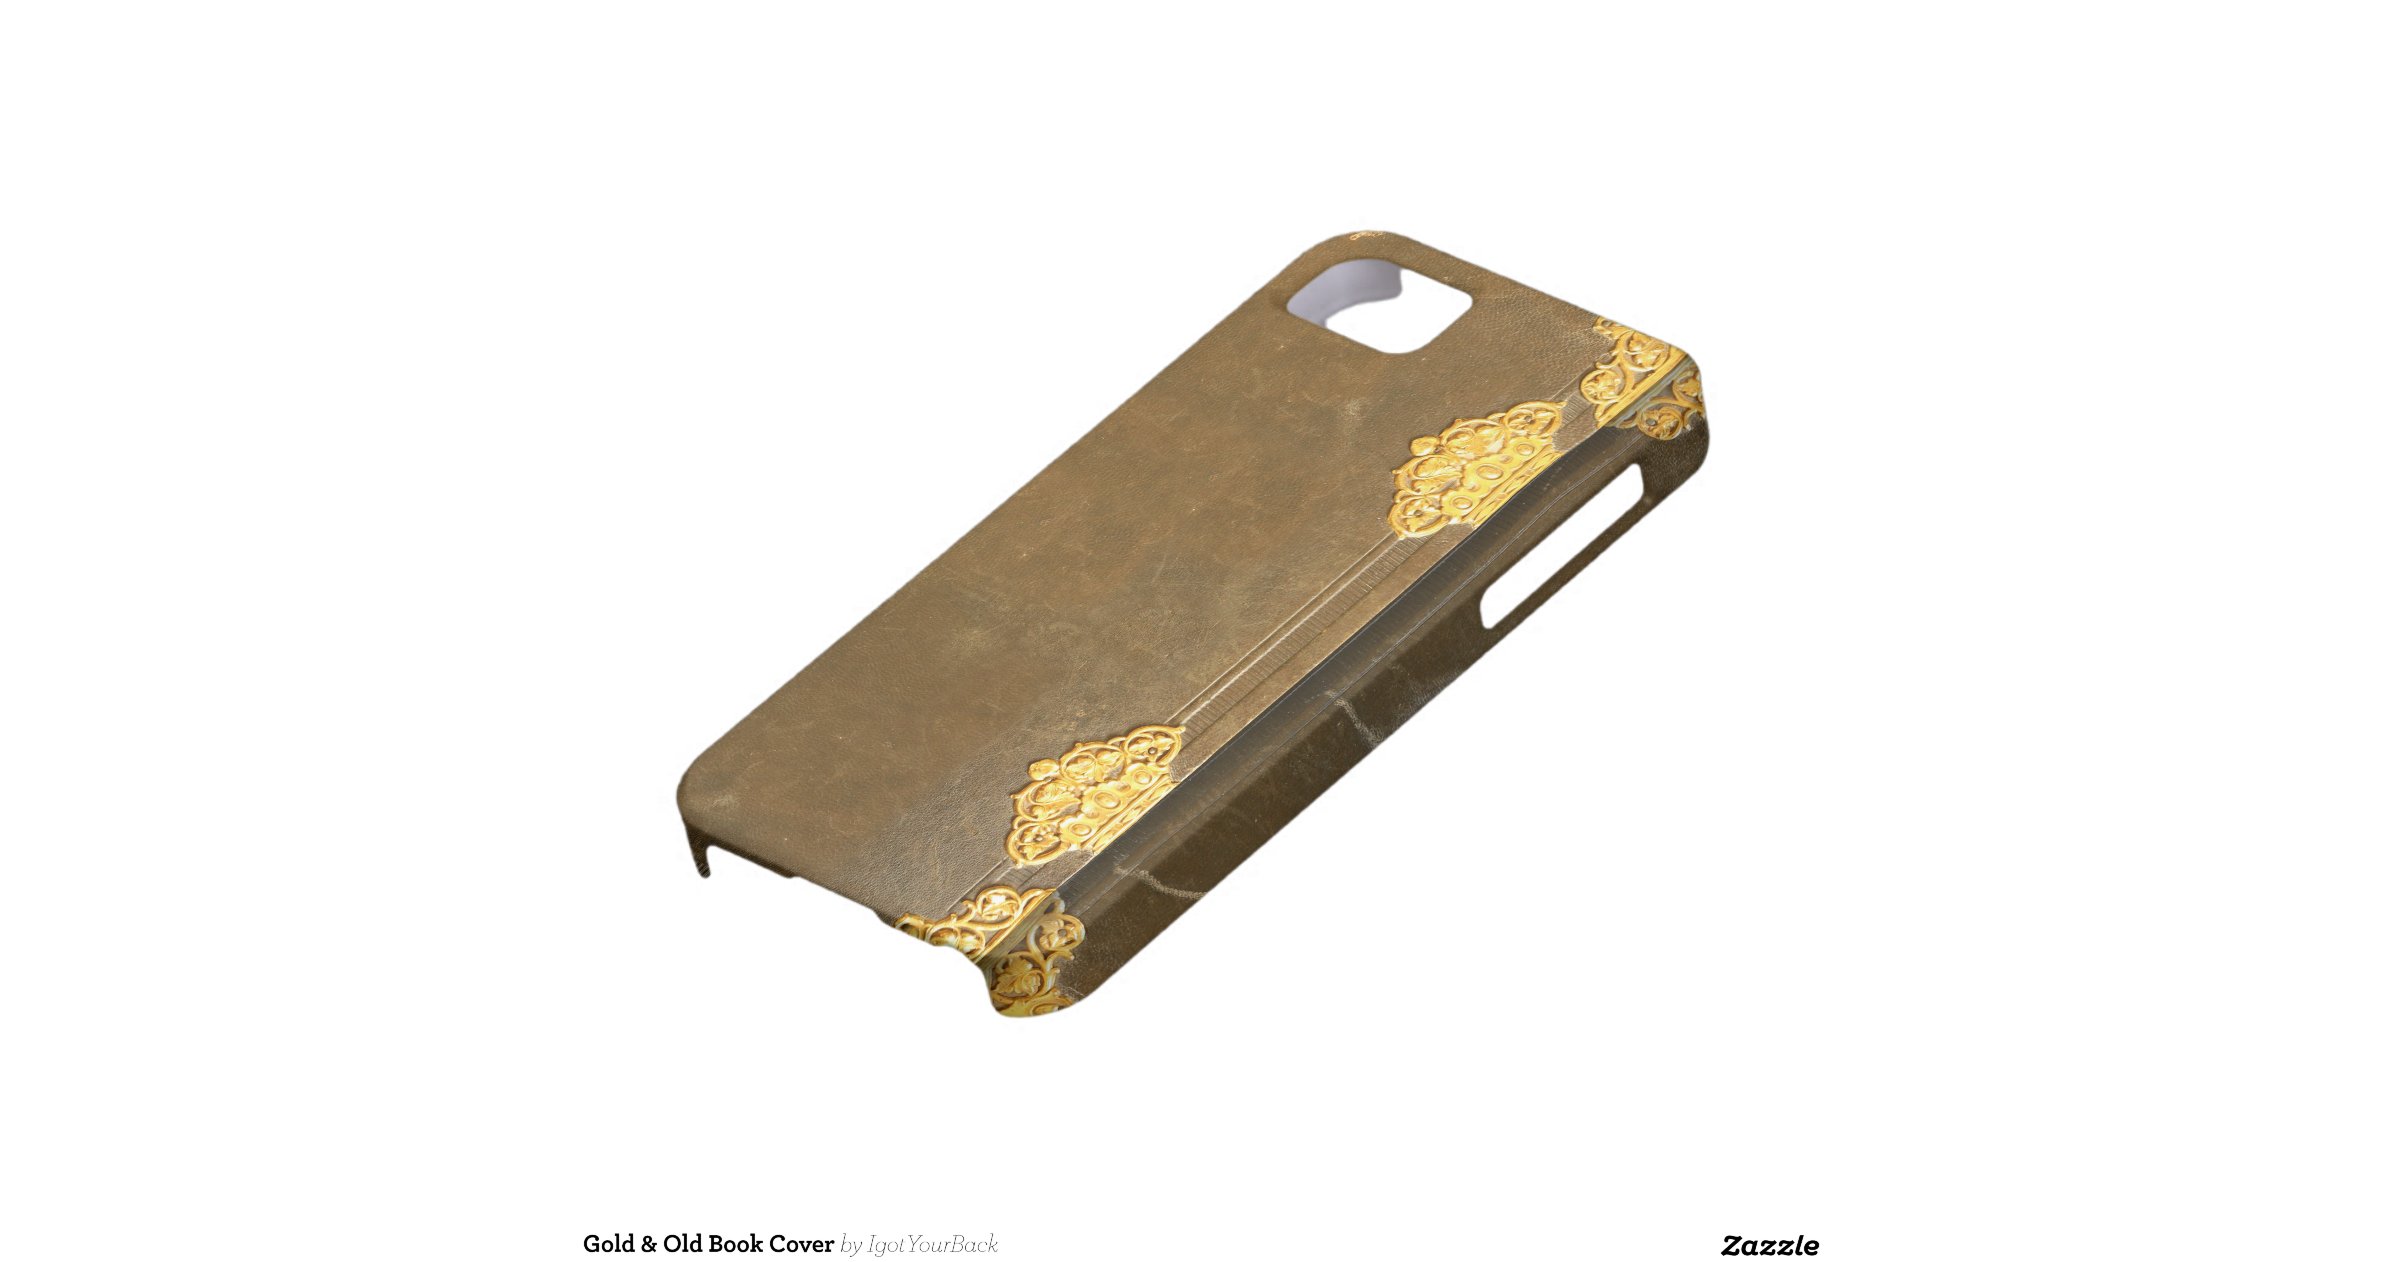 gold_old_book_cover_iphone_5_cases-rf643e0a365924c4385acc99bb0279544 ...